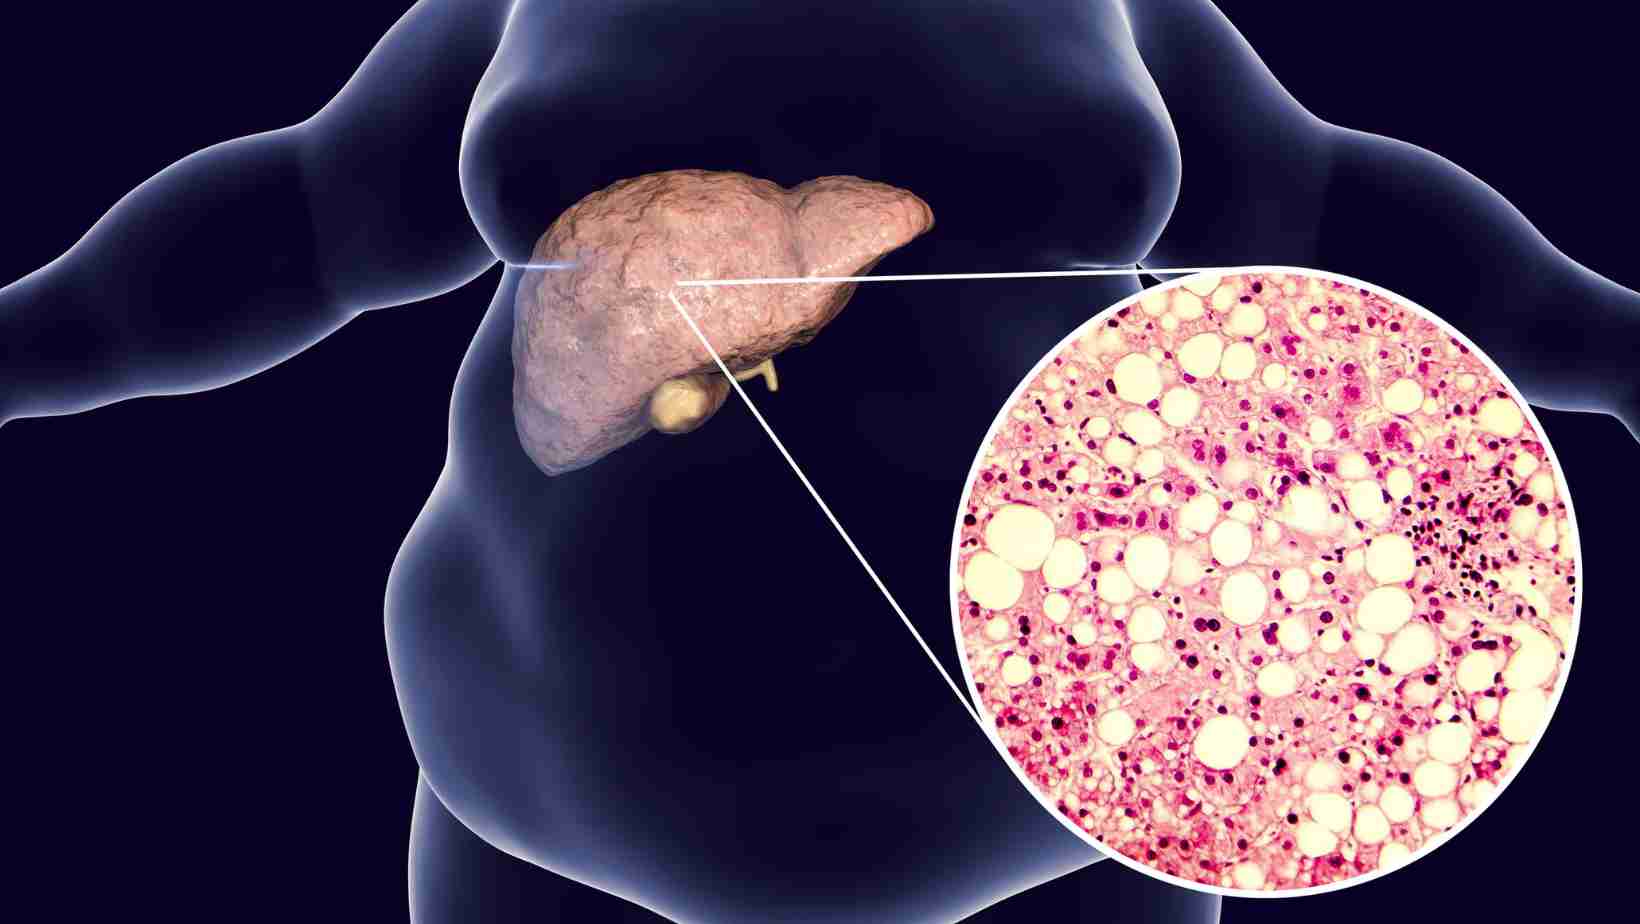 How long can you live without a liver transplant?